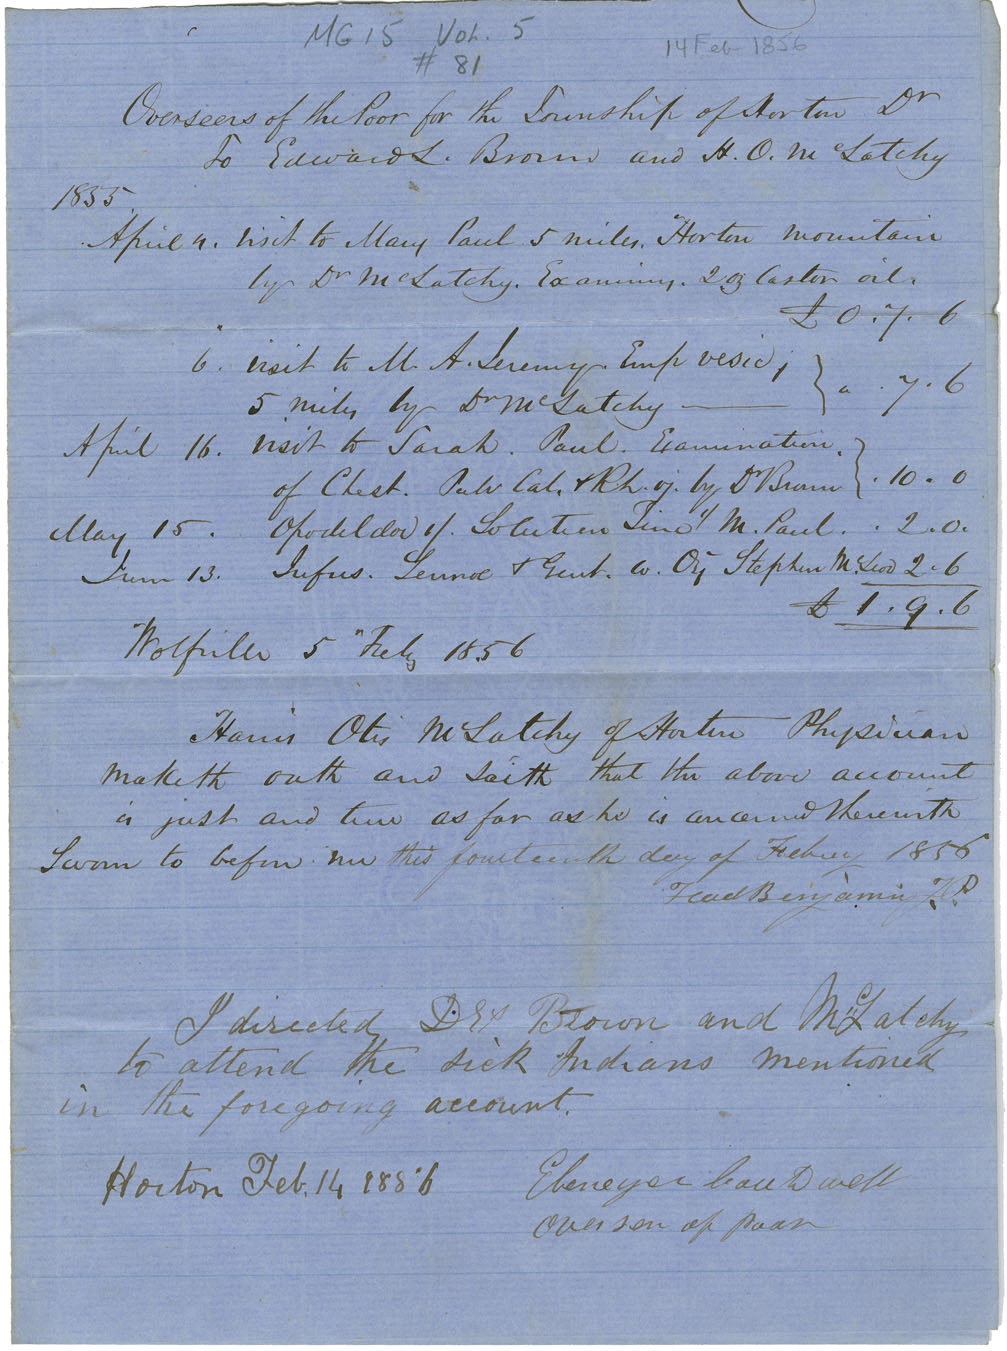 Petition of Dr. Brown and H.O. McSatchy of Horton township requesting money for services to Mi'kmaq.